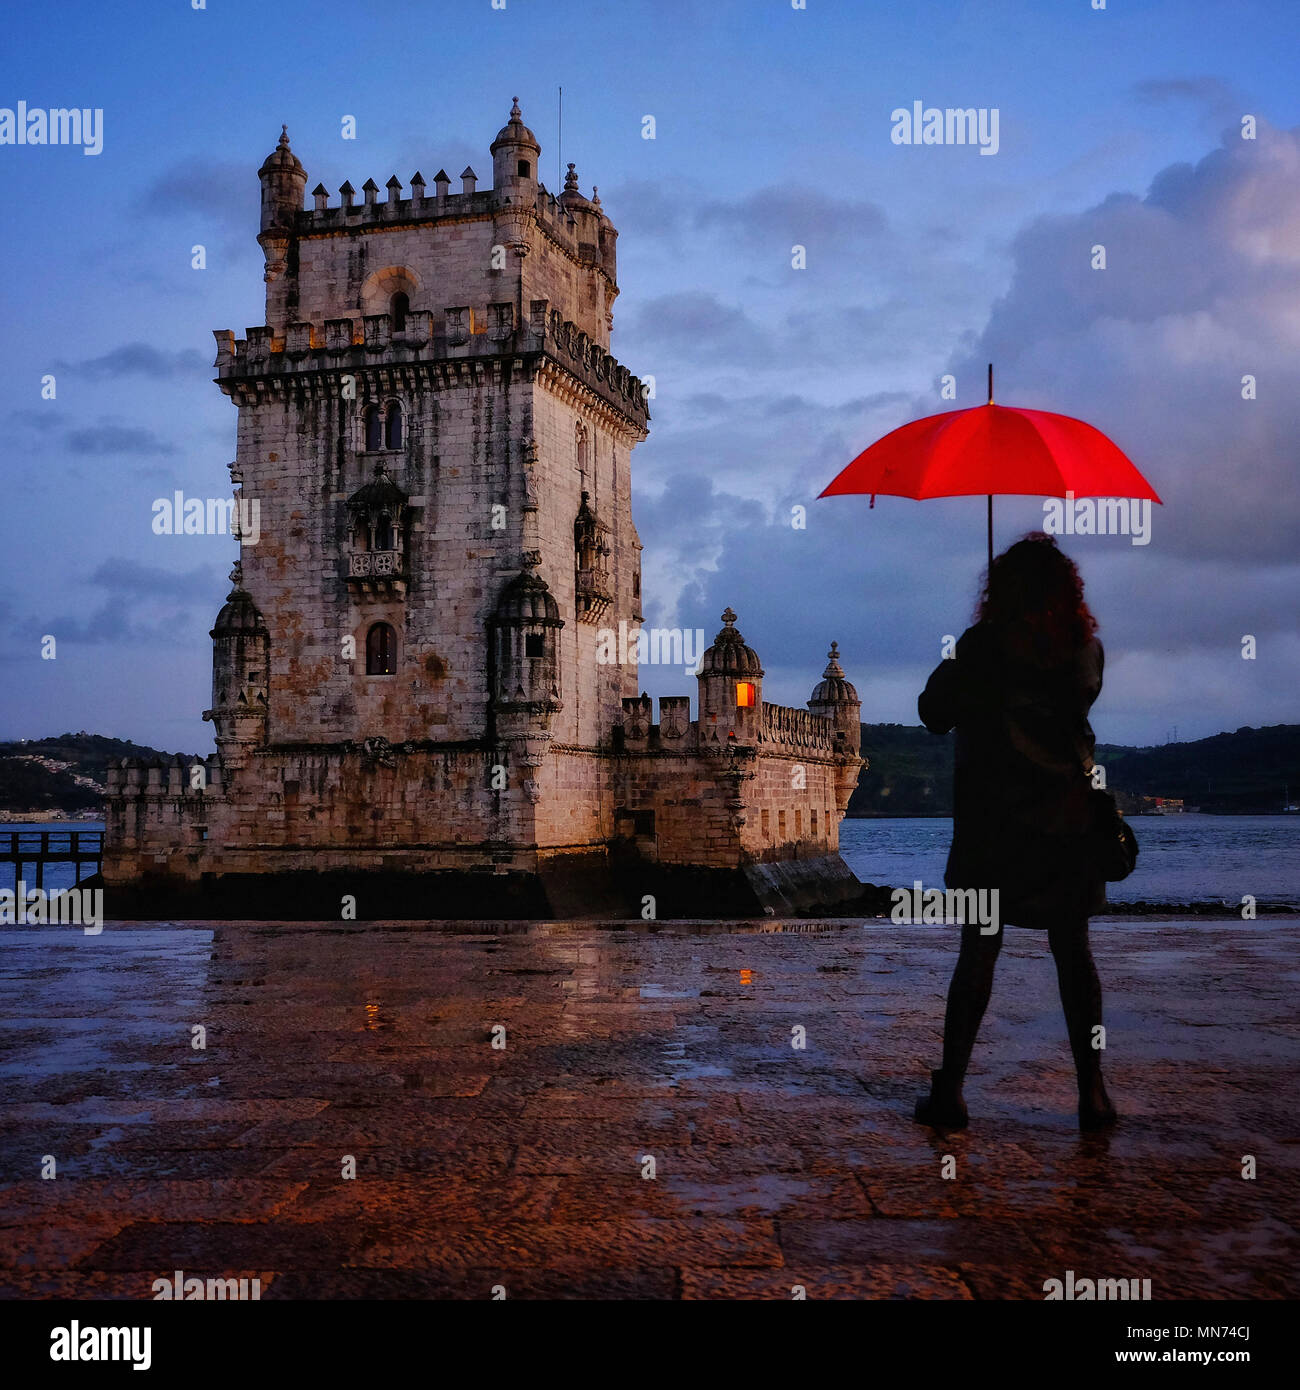 Woman holding red umbrella at Belem Tower, Lisbon Portugal Stock Photo